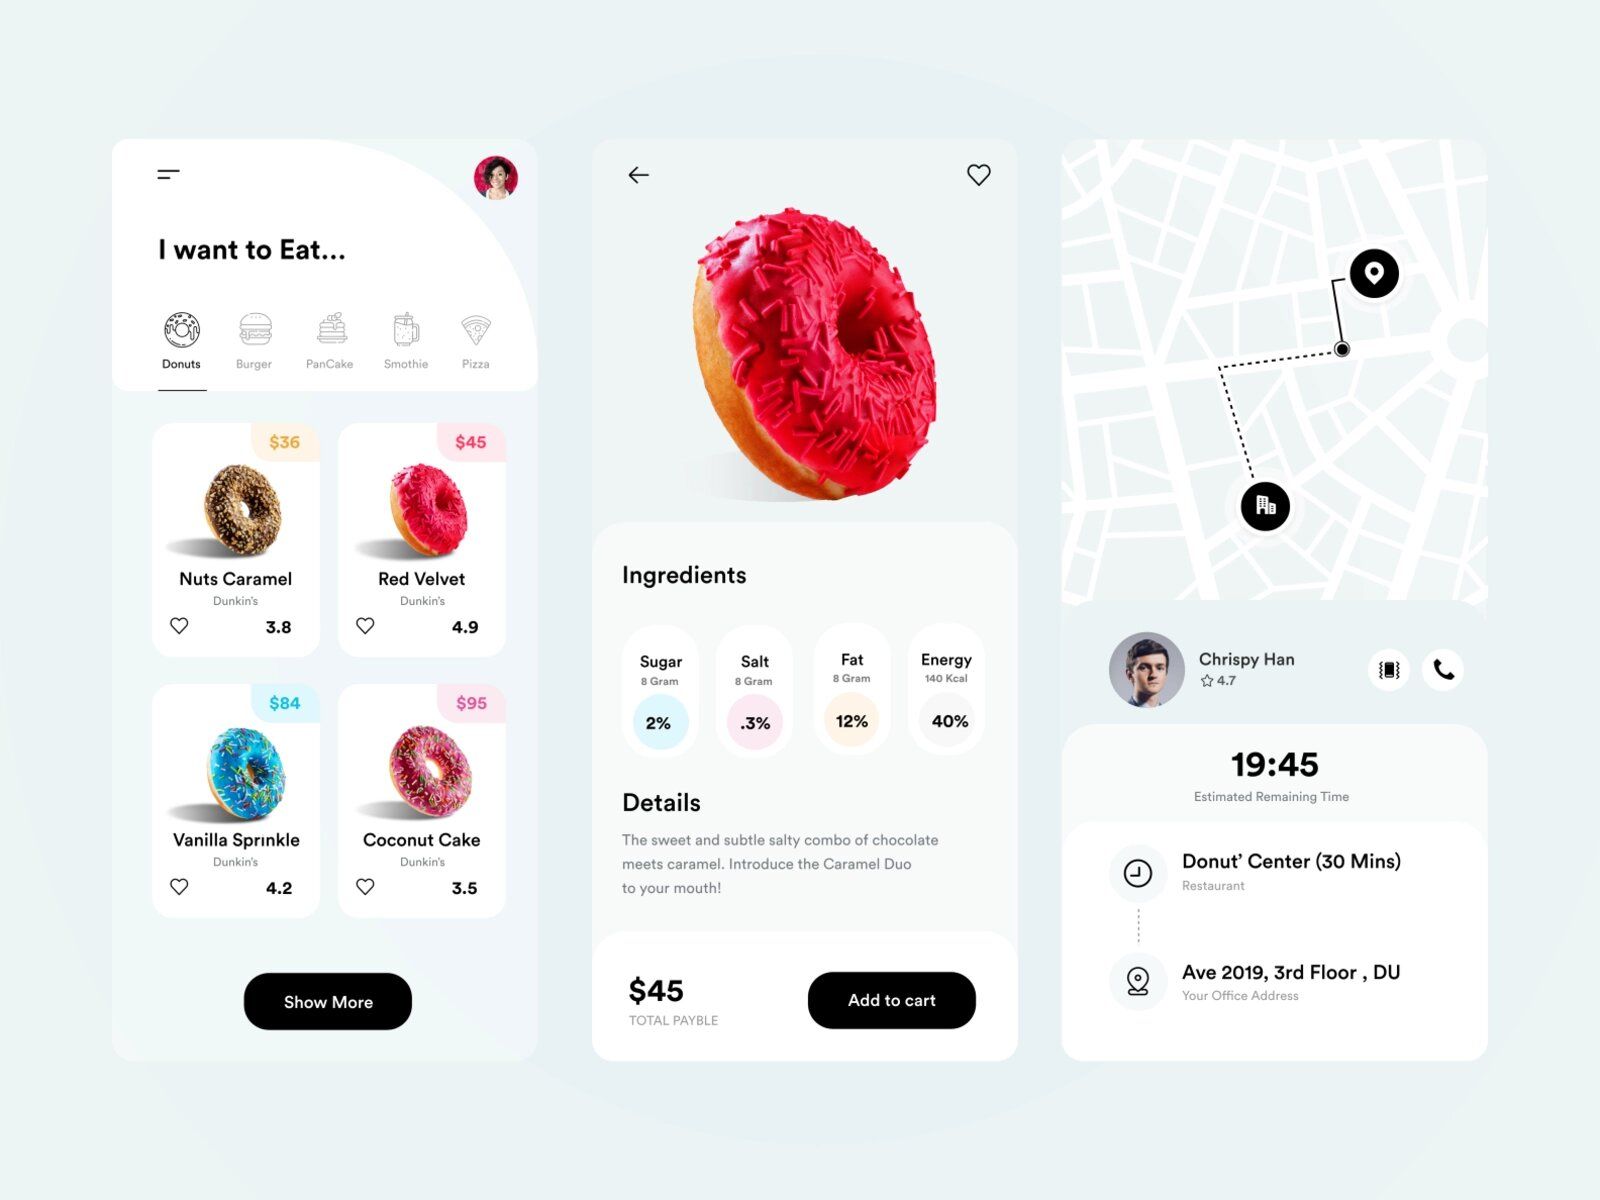 To make a food delivery mobile app, don’t forget to include building a restaurant’s version in your “how much does it cost to develop” estimate (*image by [DStudio®](https://dribbble.com/D-studio){ rel="nofollow" target="_blank" .default-md}*)